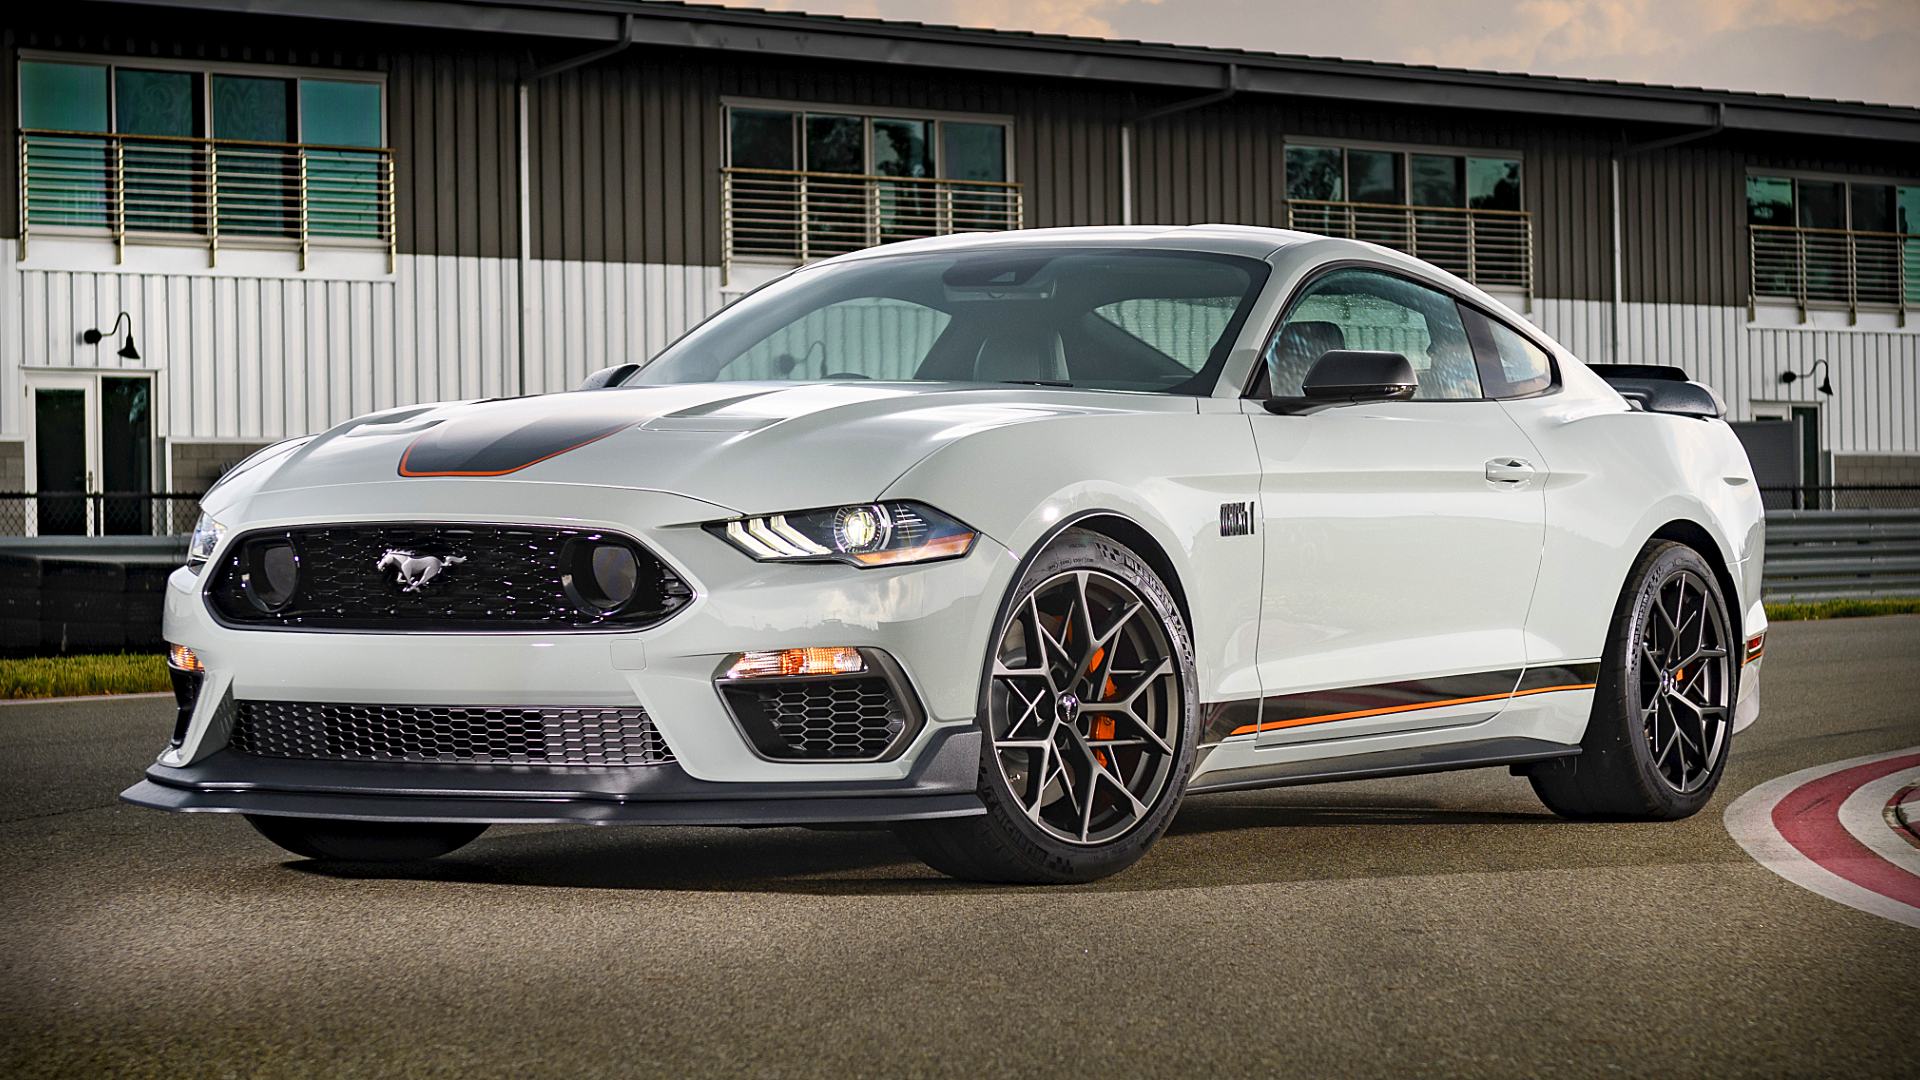 All about the 2021 Mustang GT